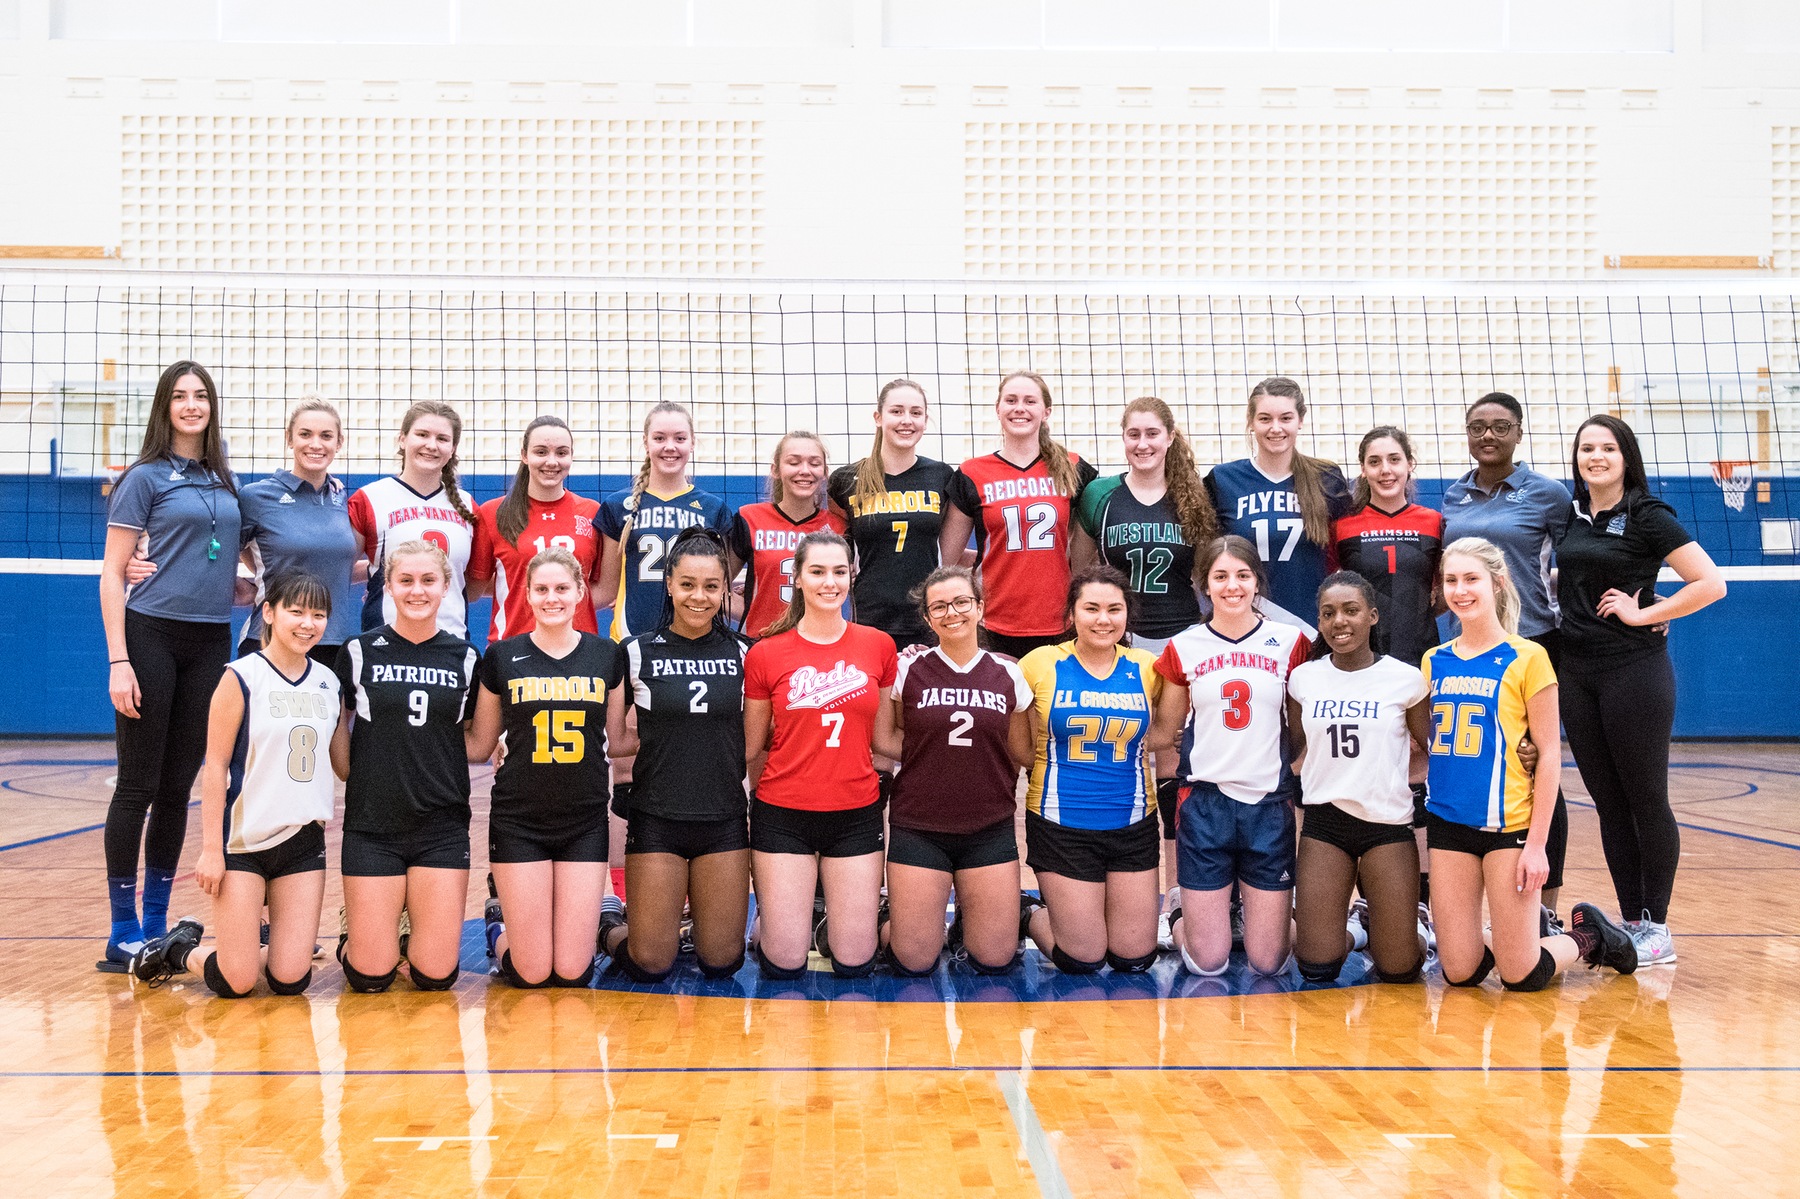 Knights to host 4th Annual Girls Volleyball Showcase